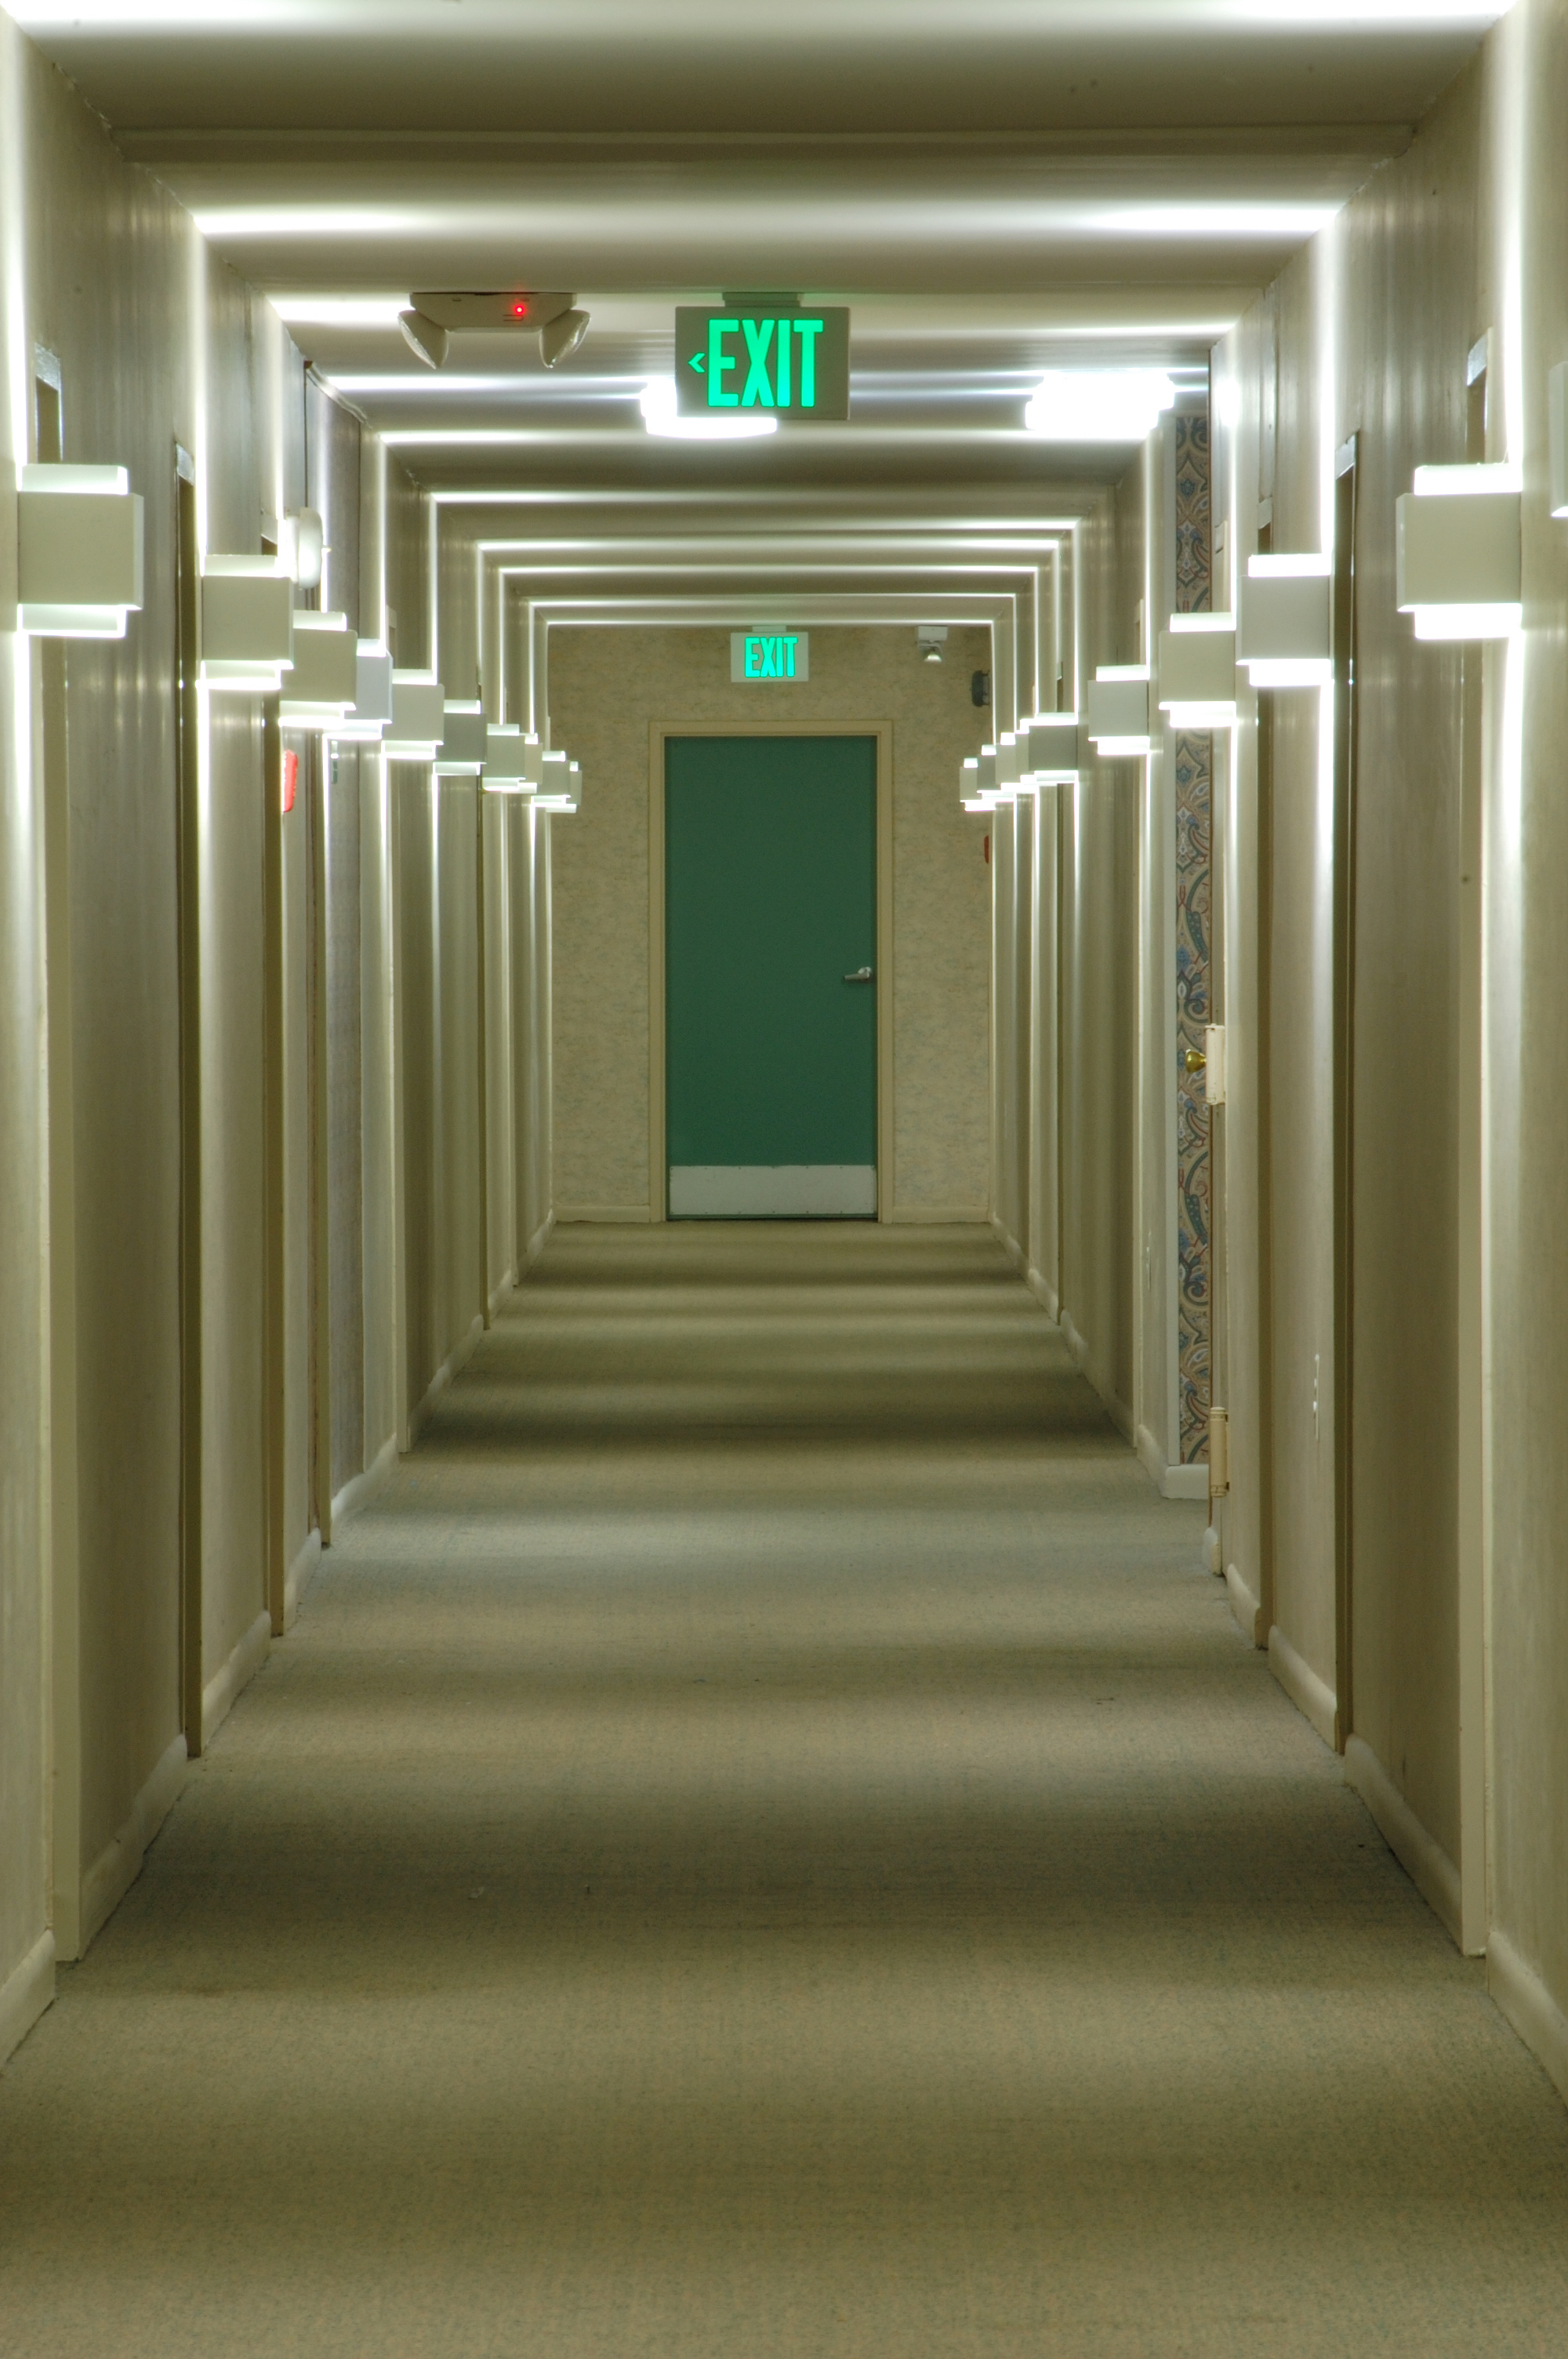 Corridor with a green emergency exit door at the end